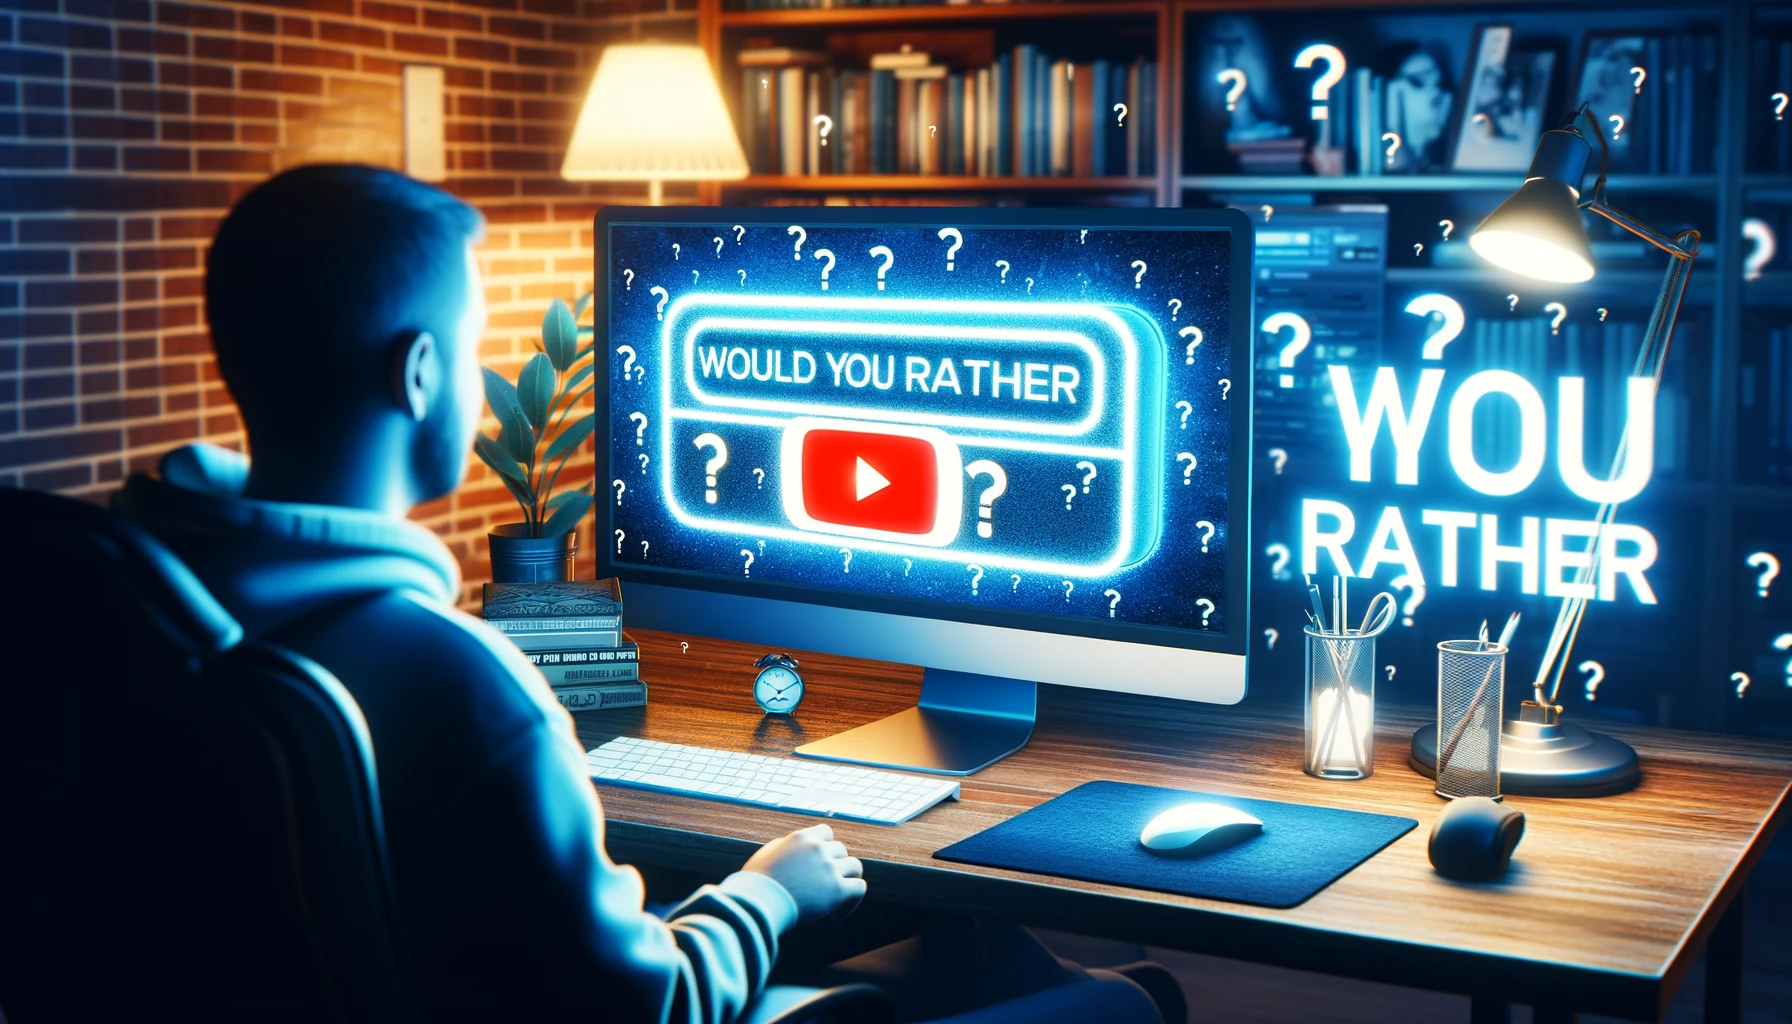 A person sitting at a computer, looking towards the camera, with a 'Would You Rather' quiz displayed on the screen. The image includes the YouTube play button symbol, emphasizing the creation of engaging 'Would You Rather' content for YouTube. The setting is modern, highlighting the concept of earning money through online content creation."